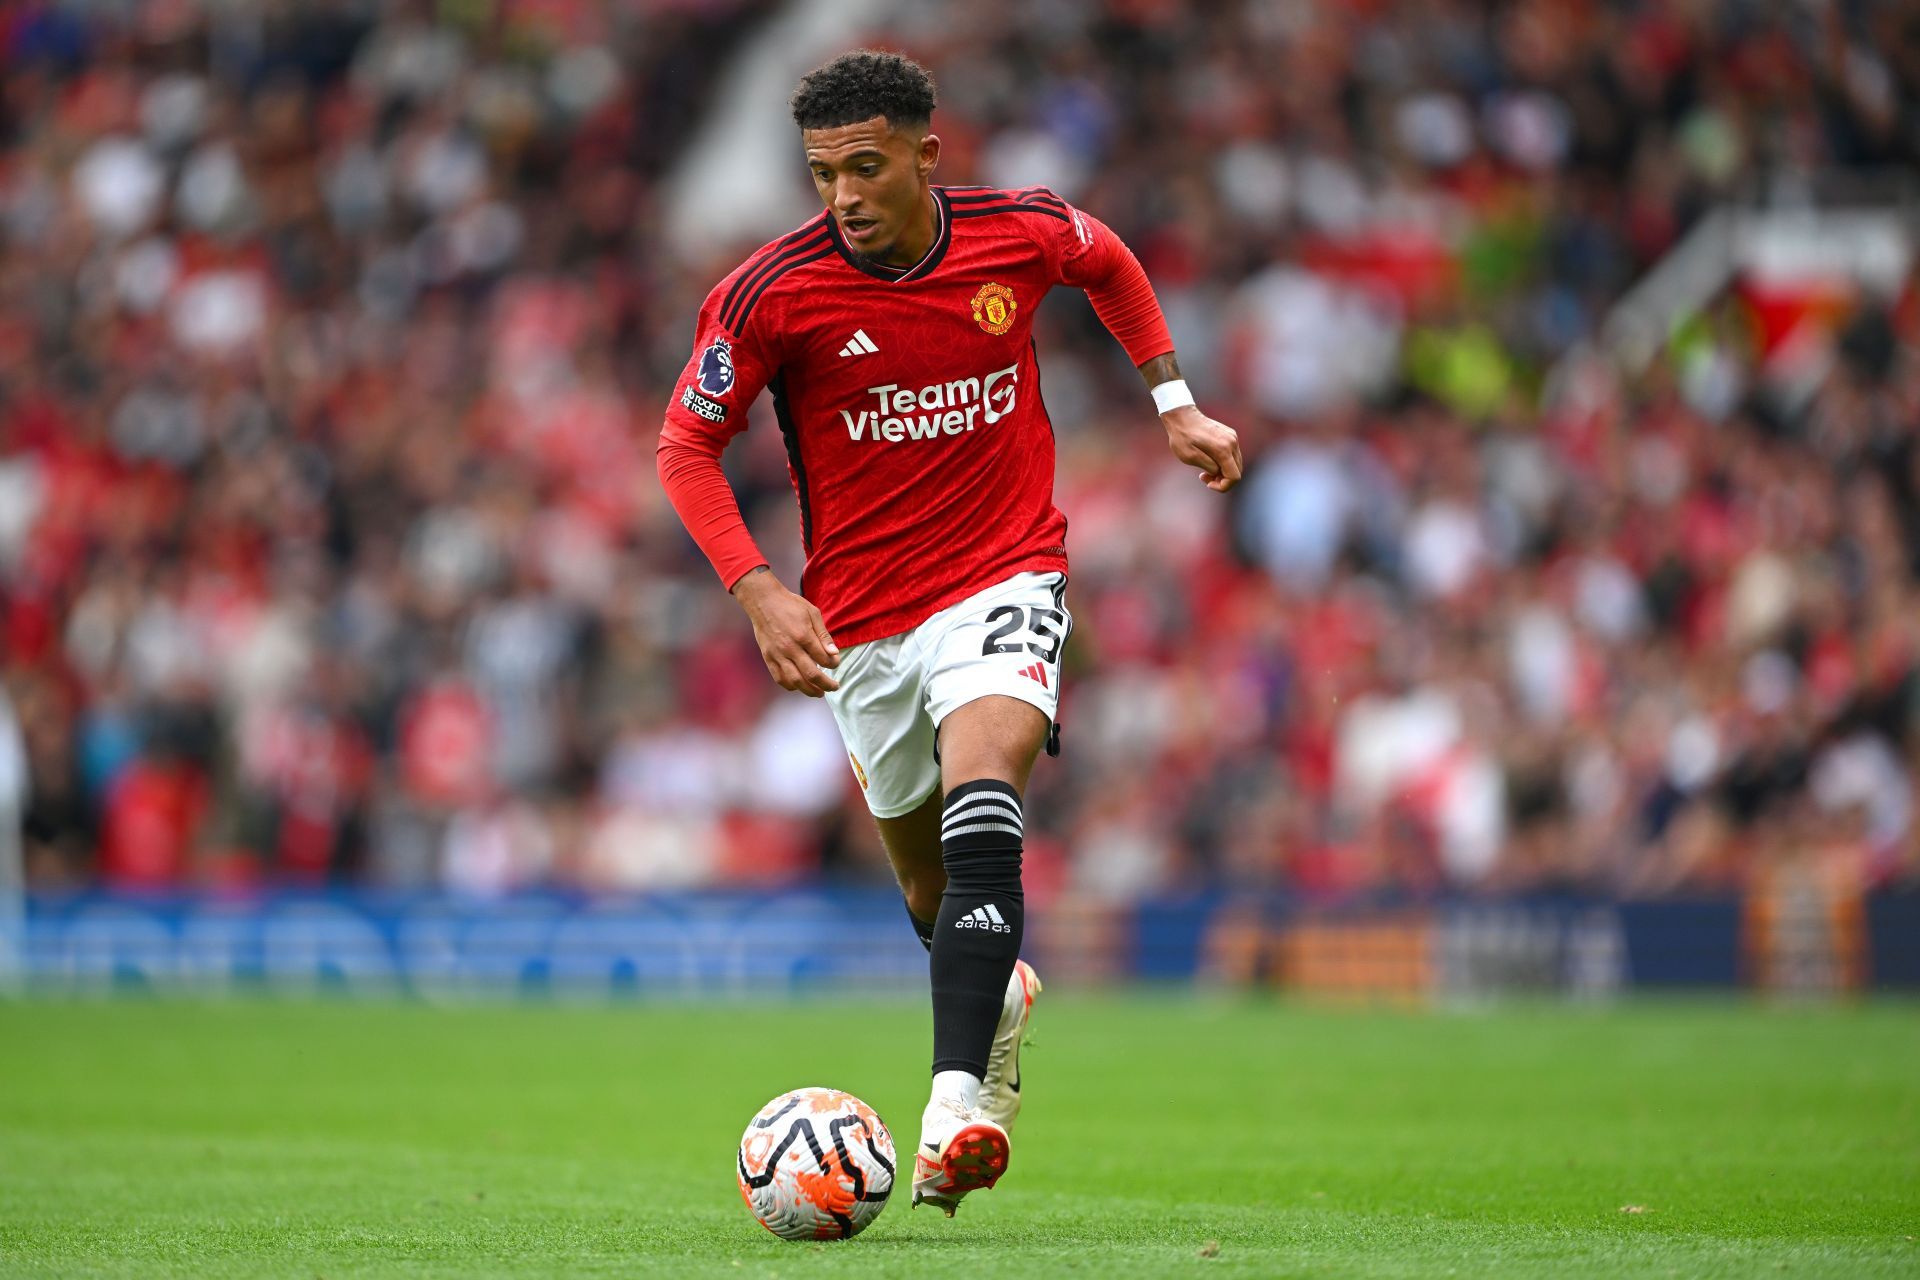 Jadon Sancho could leave Old Trafford in January.